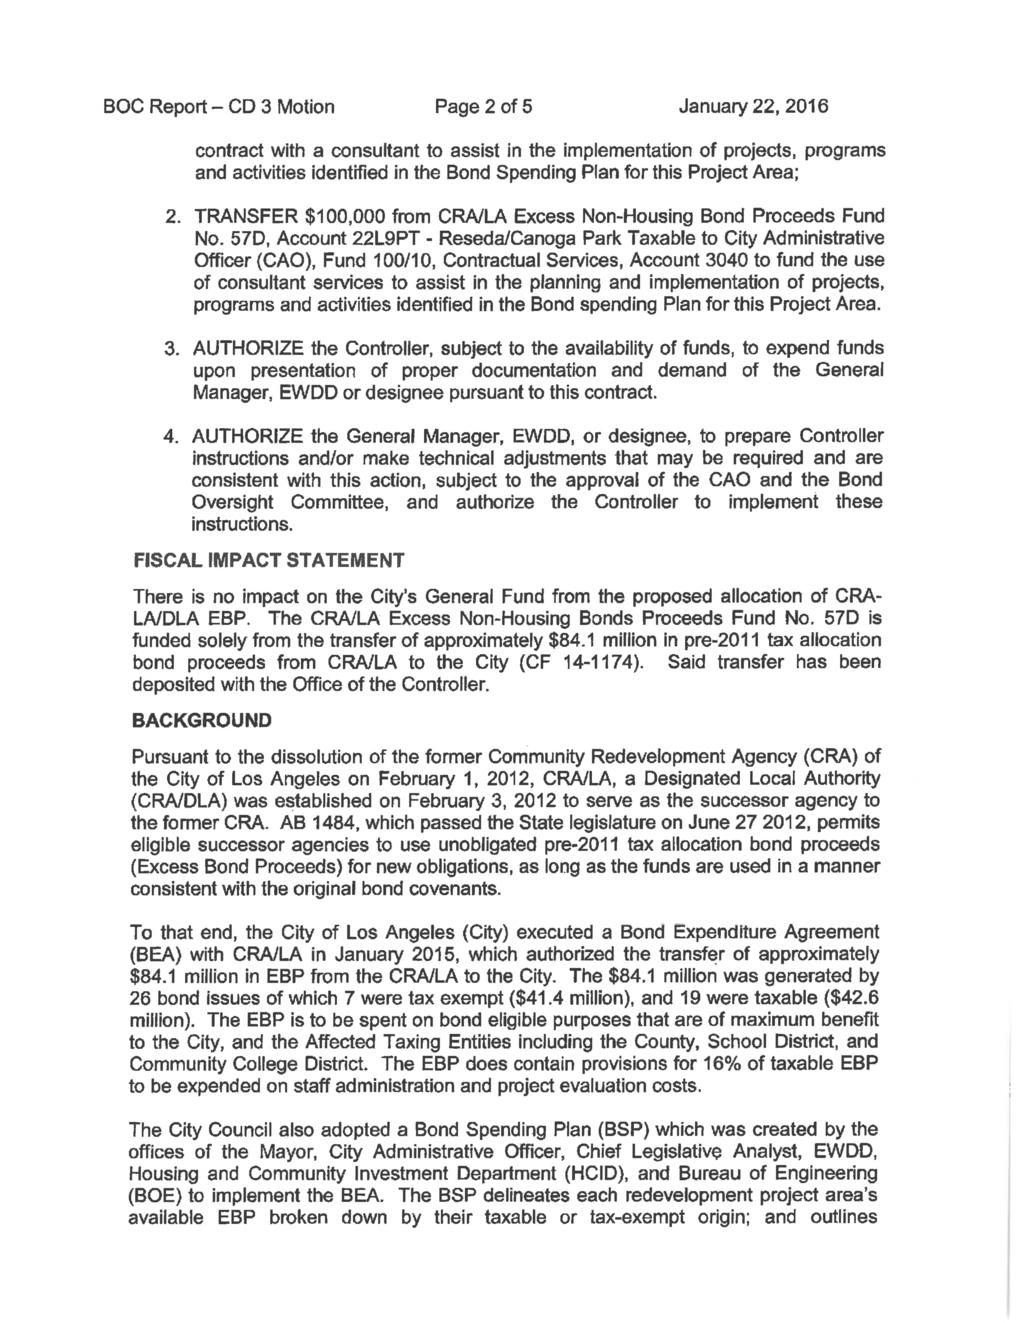 BOC Report - CD 3 Motion Page 2 of 5 January 22, 2016 contract with a consultant to assist in the implementation of projects, programs and activities identified in the Bond Spending Plan for this